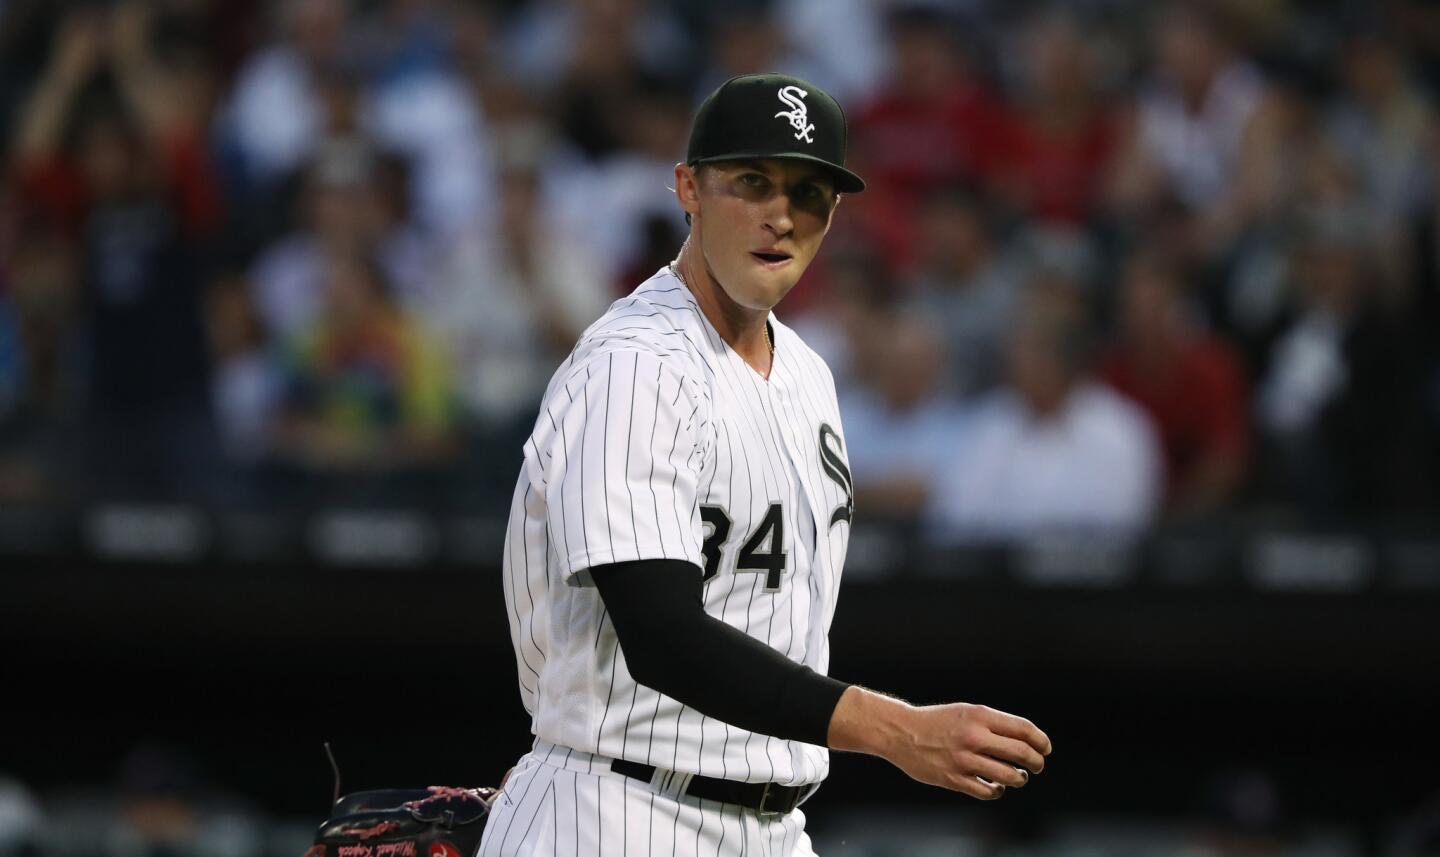 White Sox starting pitcher Michael Kopech heads to the dugout after throwing against the Red Sox in the first inning at Guaranteed Rate Field on Aug. 31, 2018.